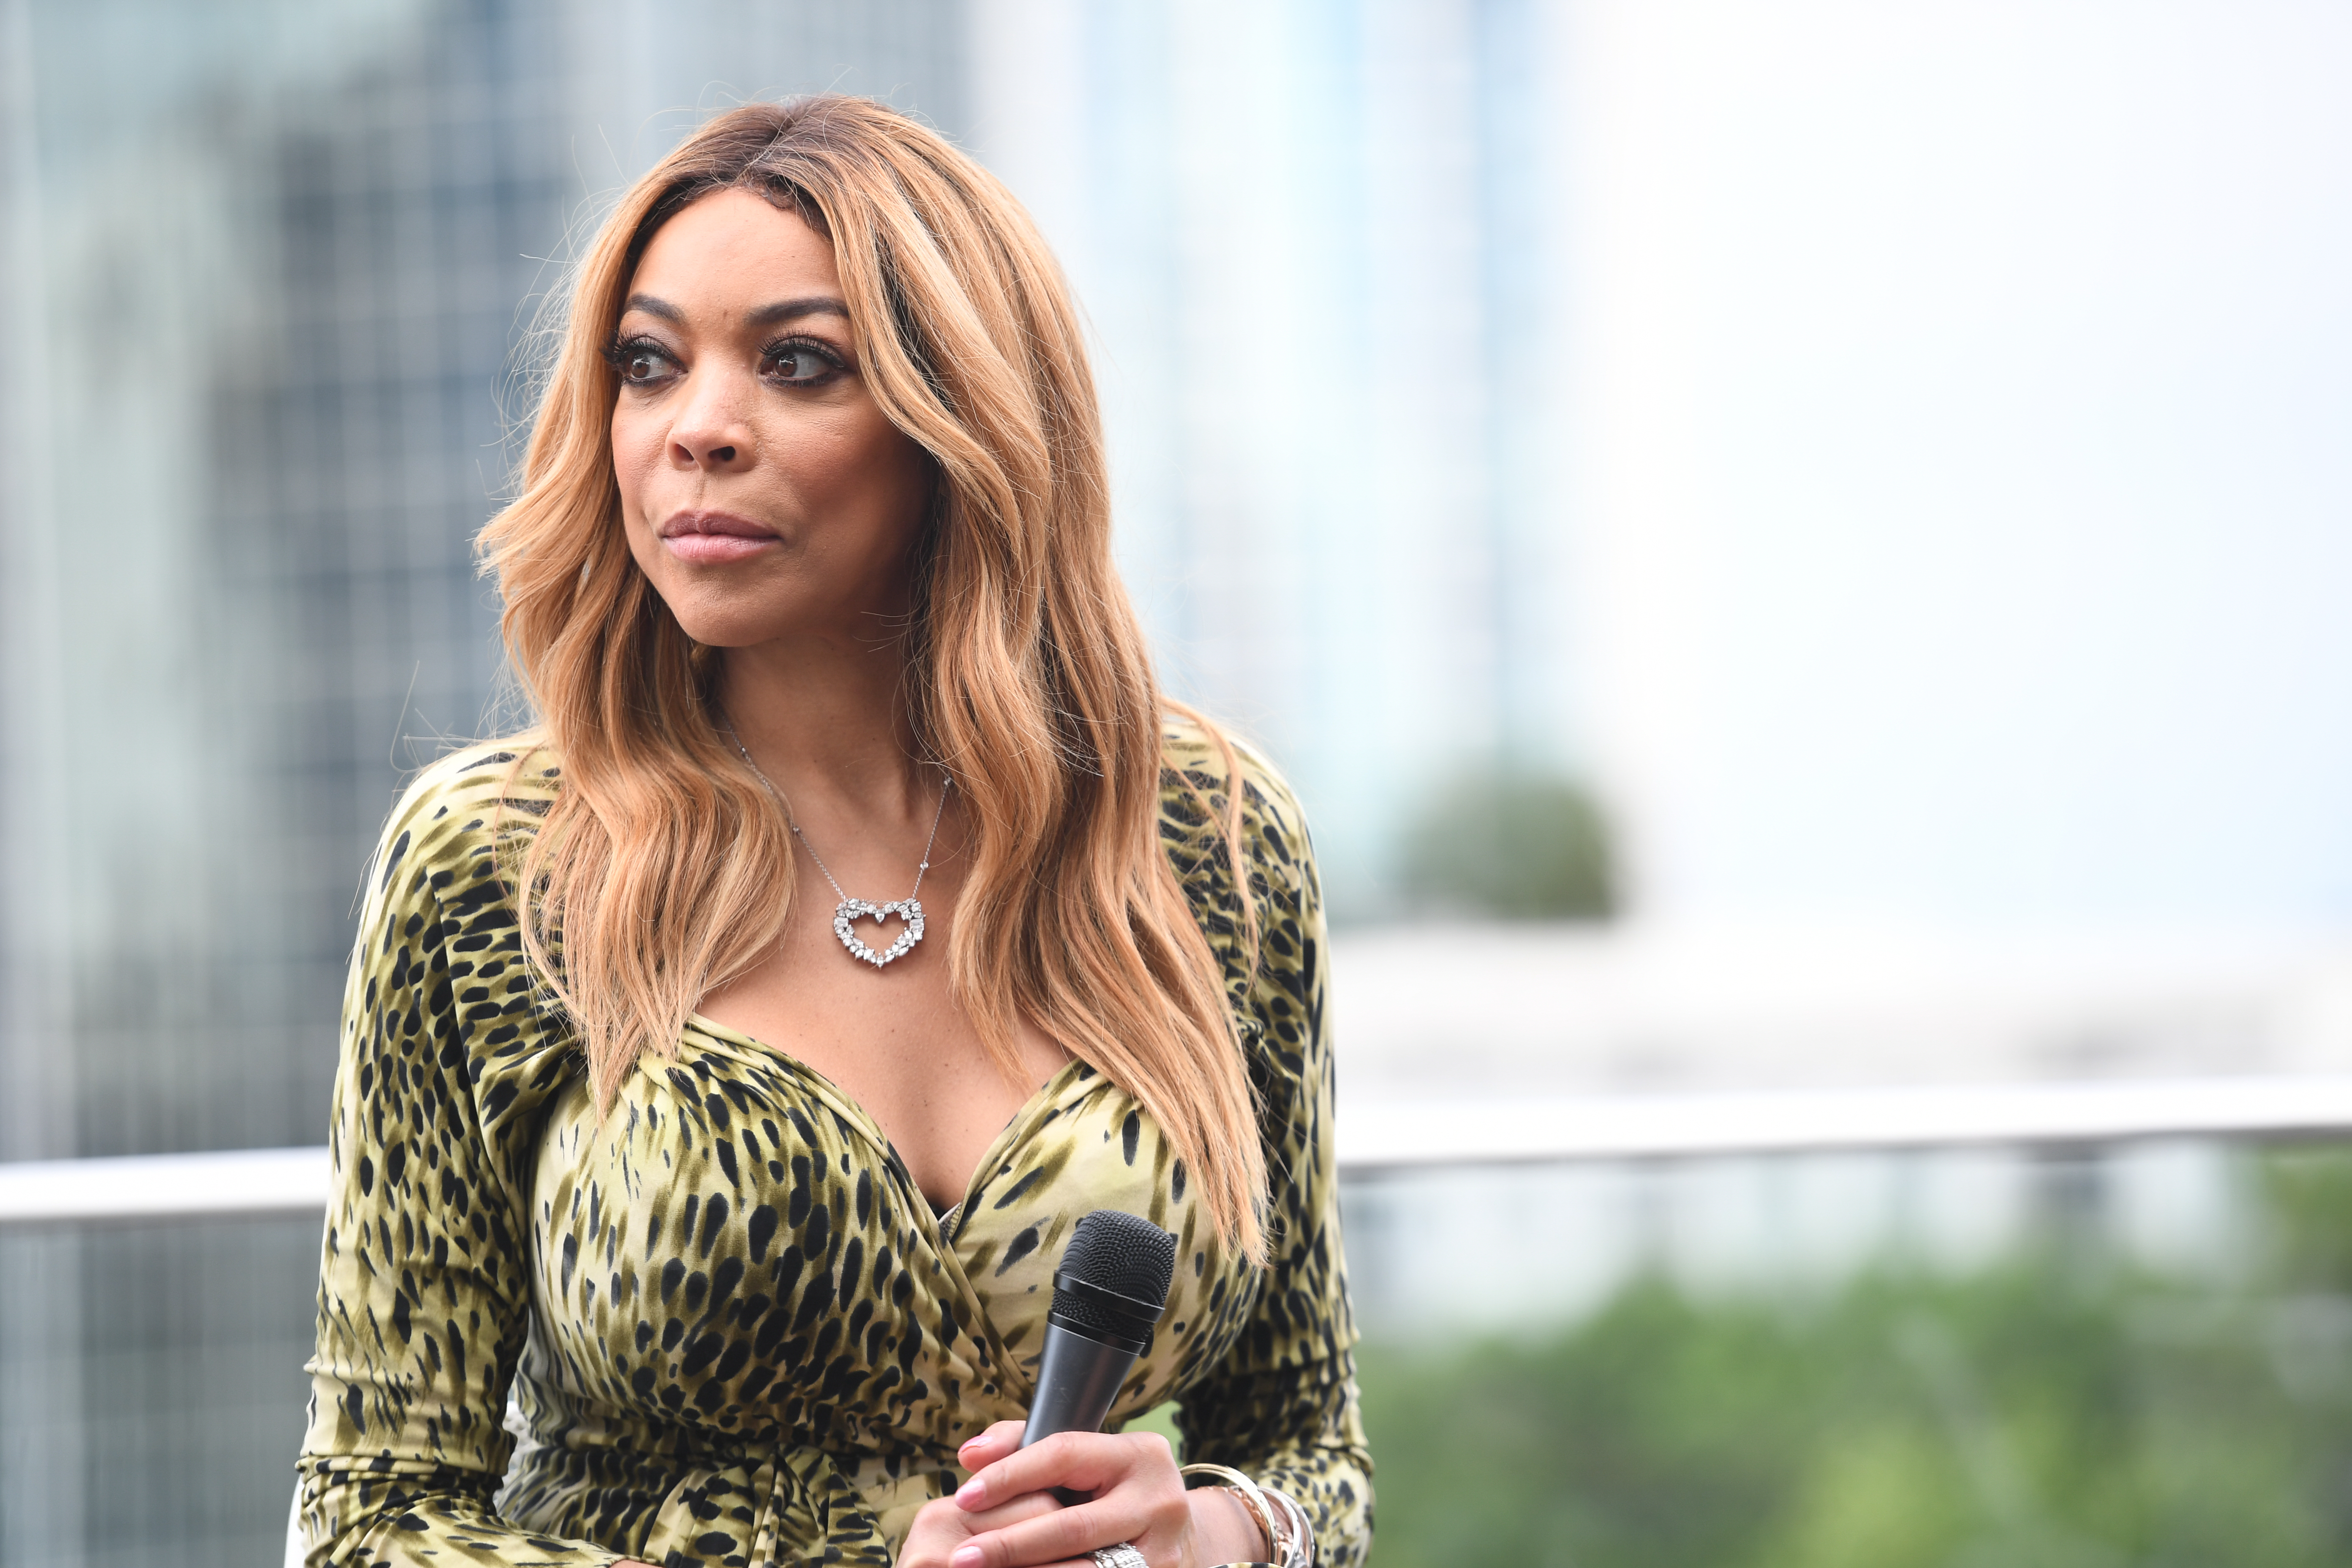 Wendy Williams attends Wendy Digital Event at Atlanta Tech Village Rooftop on August 29, 2017, in Atlanta, Georgia | Source: Getty Images